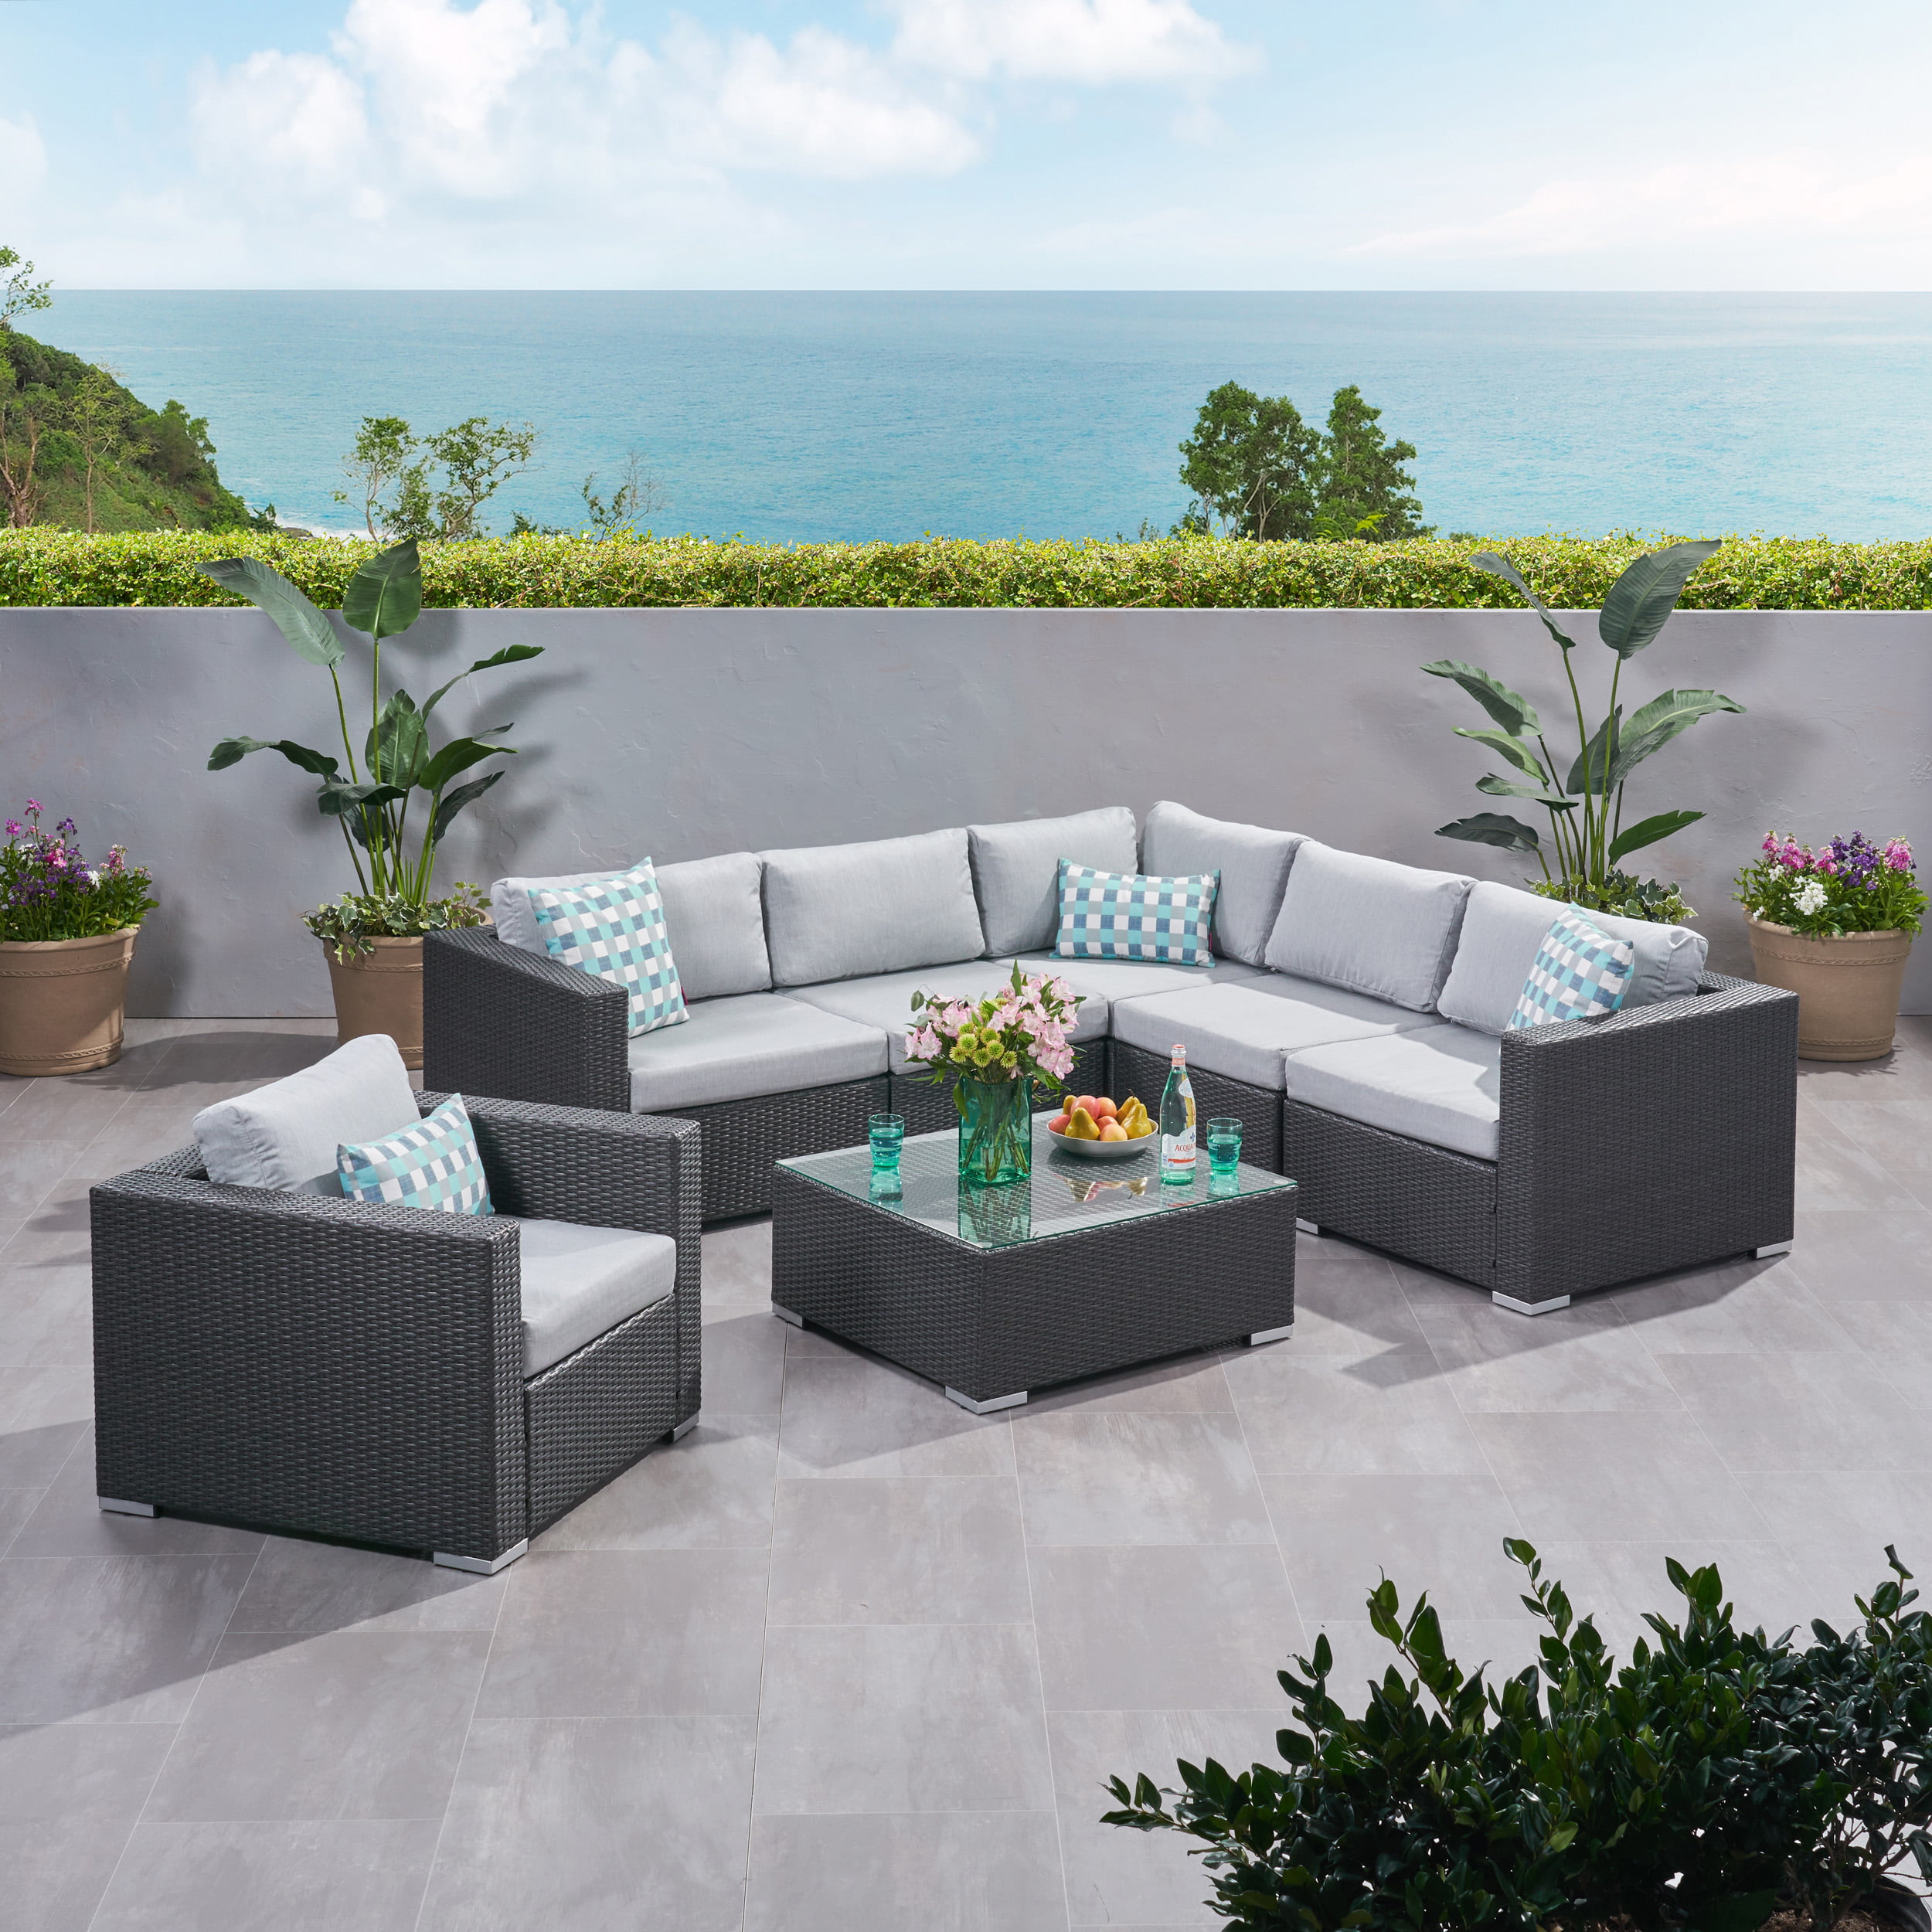 Faviola Outdoor 6 Seater Wicker Sectional Sofa Set With Sunbrella Cushions Gray And Canvas Granite Com - Outdoor Patio Sectionals With Sunbrella Cushions